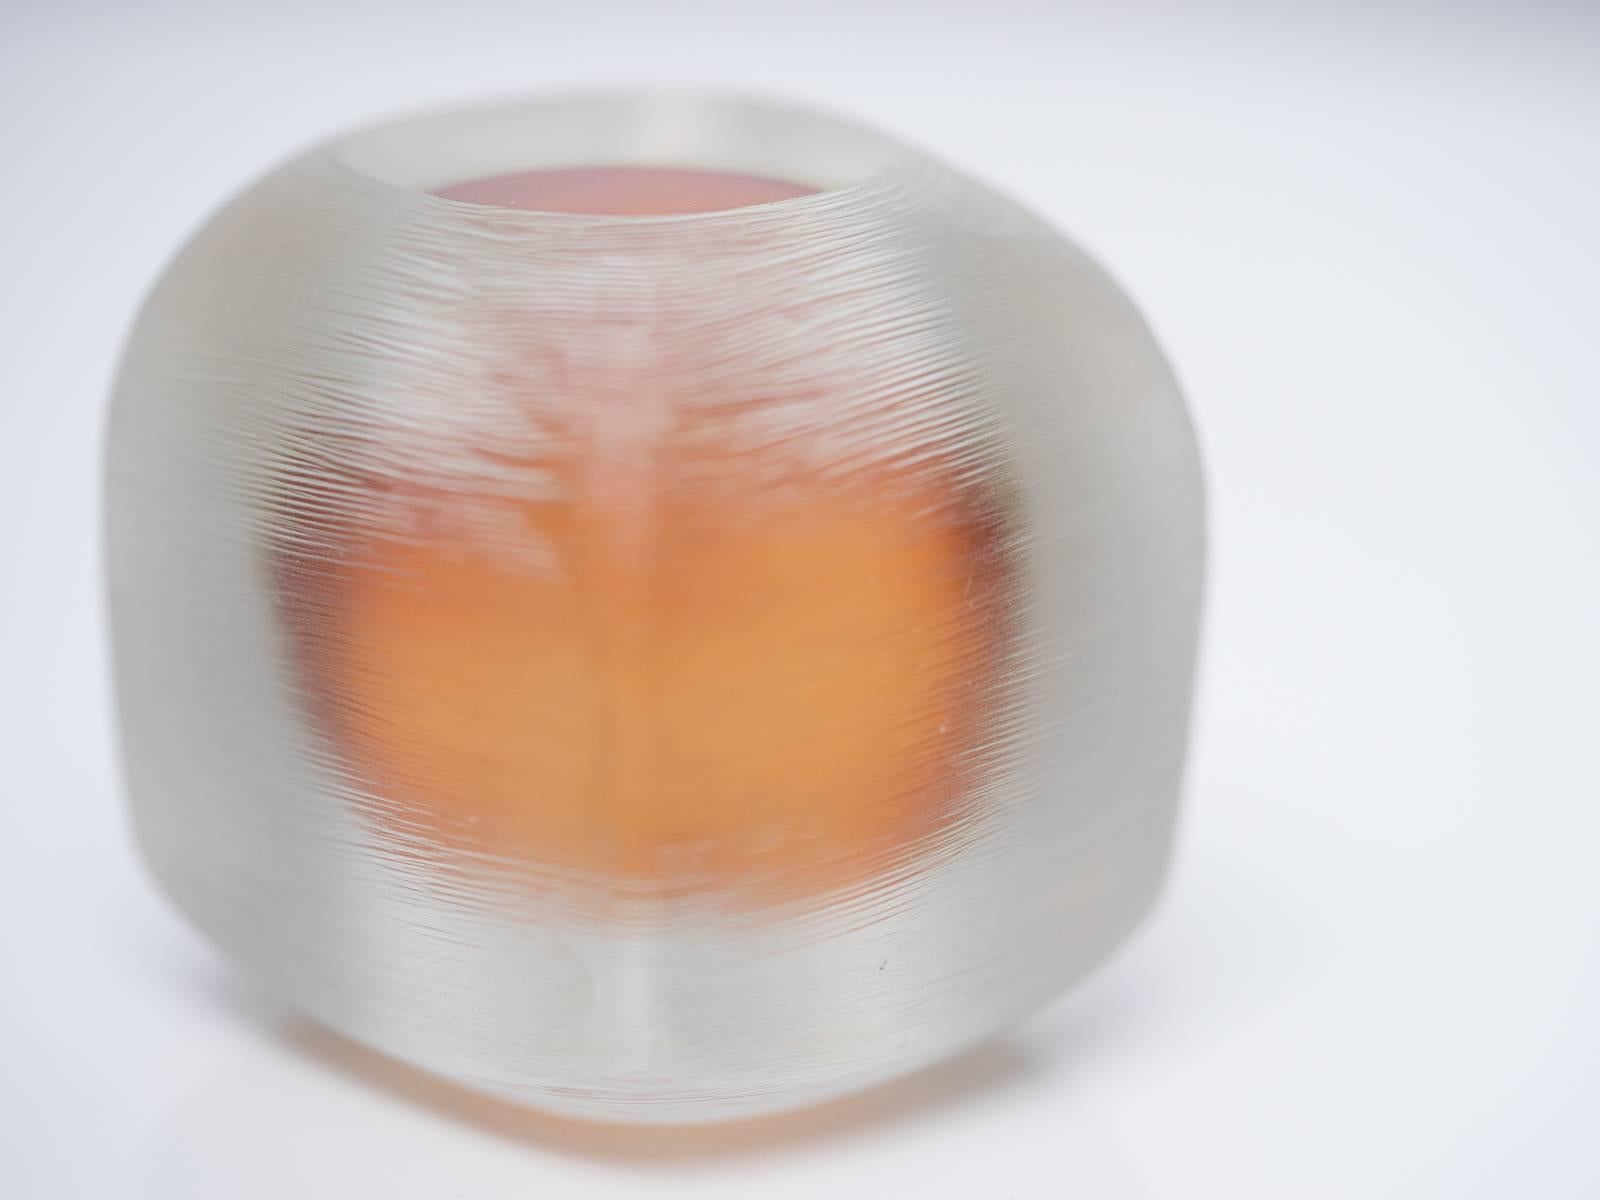 Etched Venini Vetro Sommerso Incised Murano Glass Paperweight with Orange Core, 1968